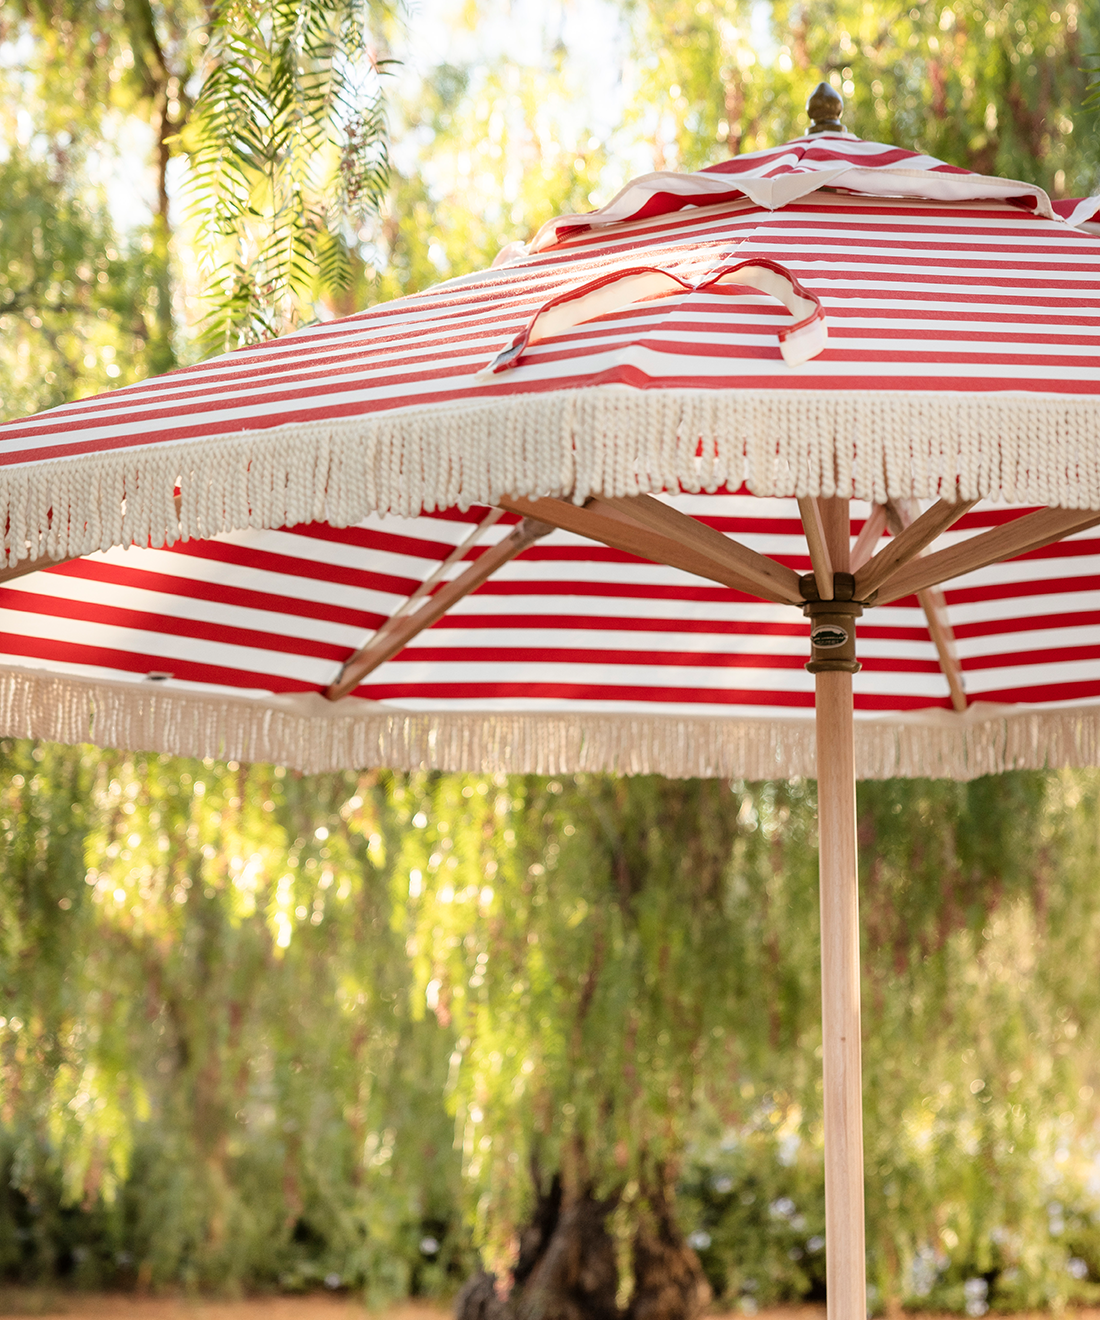 Parasol with Tassels in Red Stripe